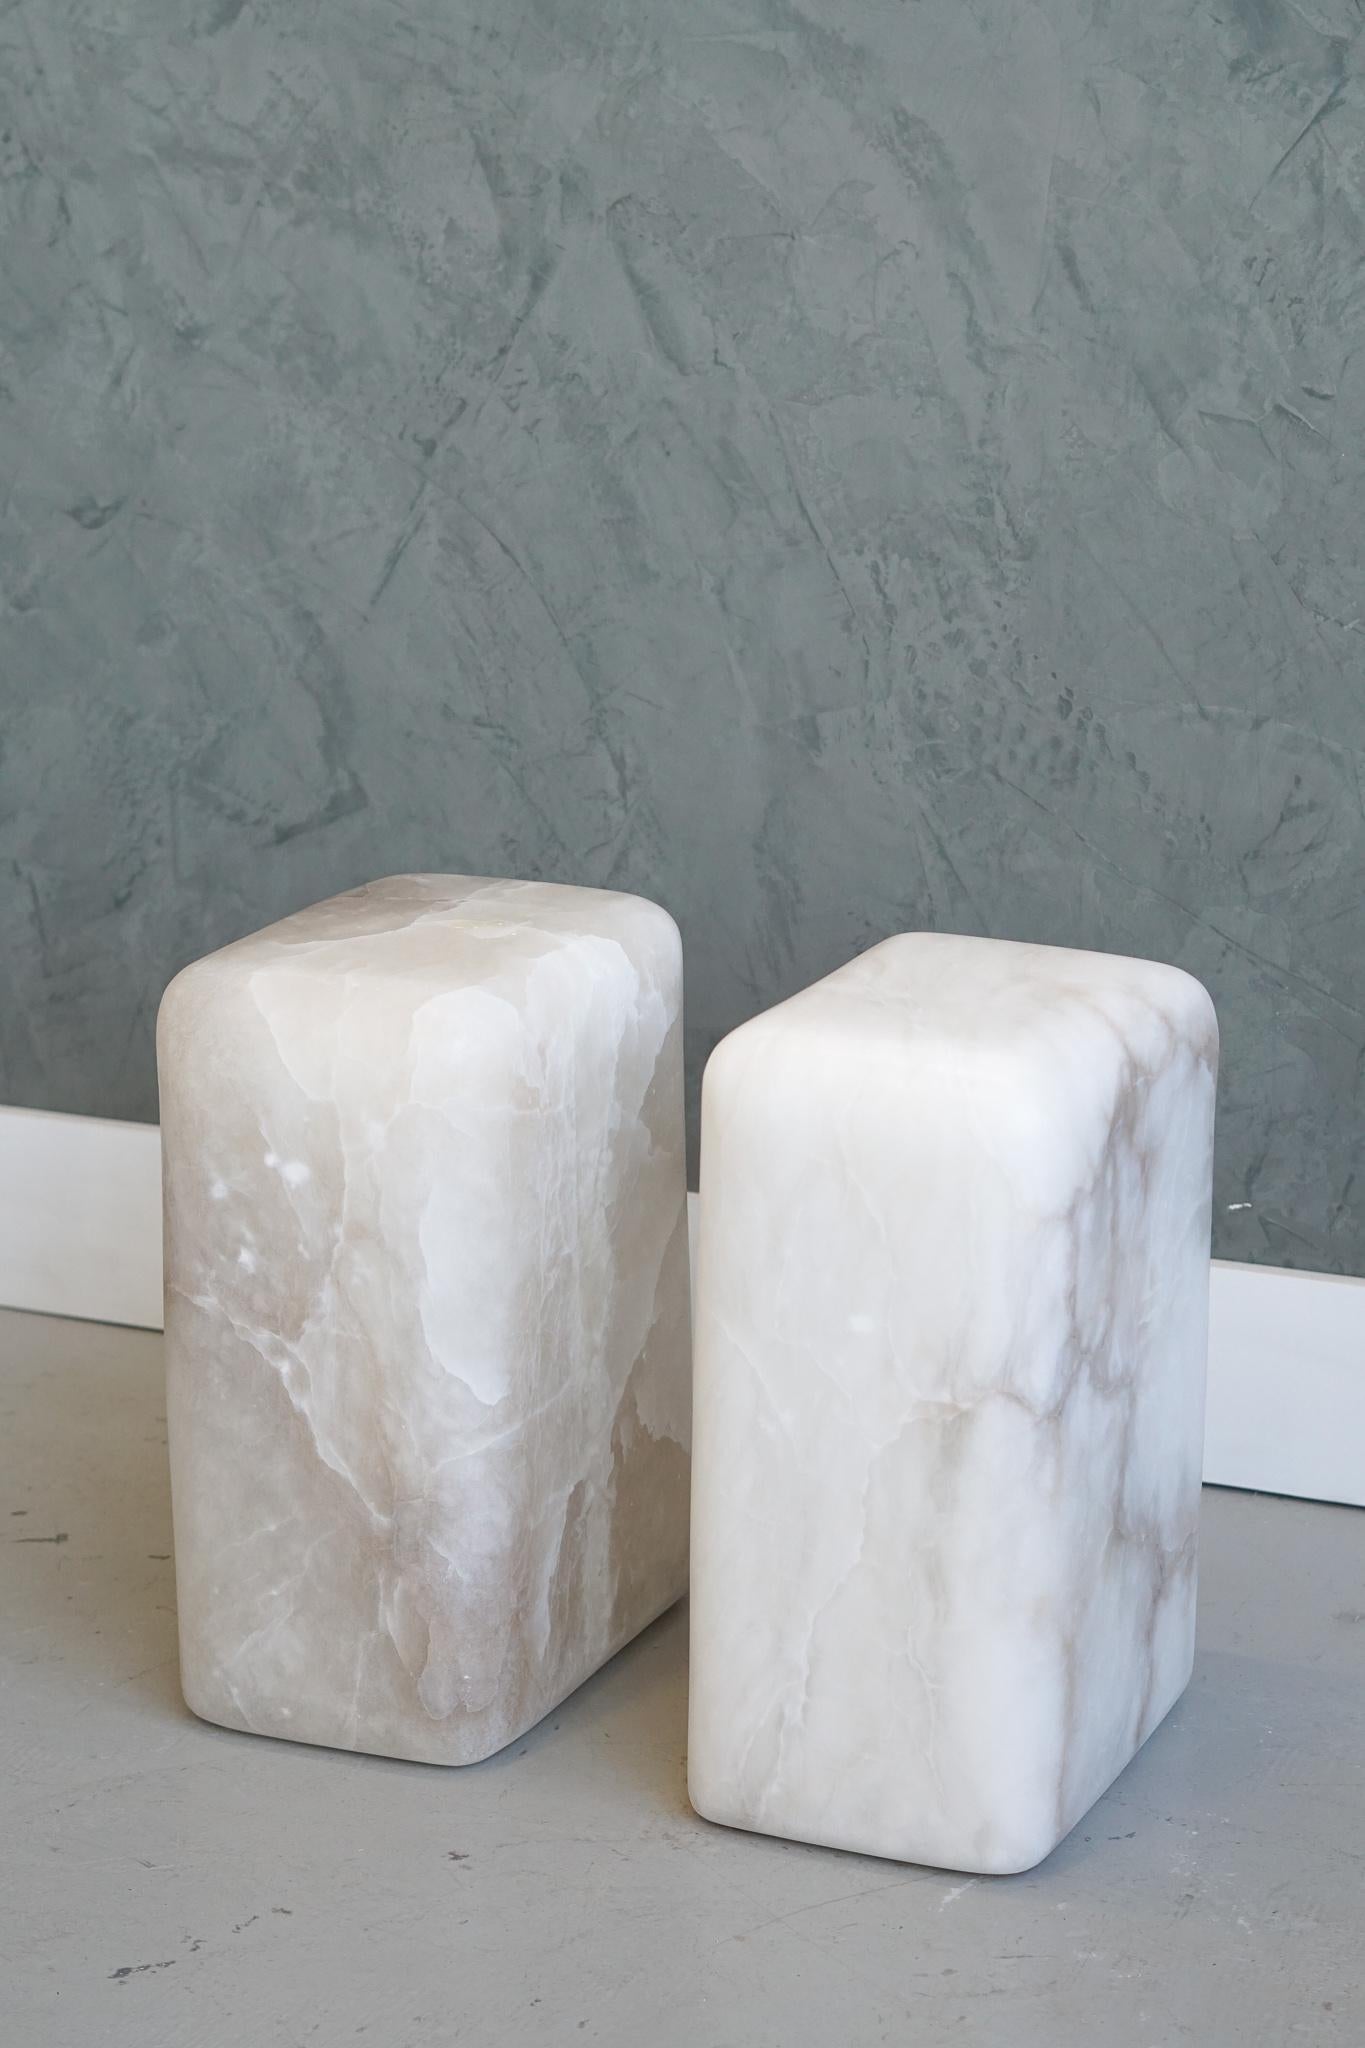 Set of 2 chunk squared side tables by Swell Studio
Dimensions: D31 x W31 x H46 cm 
Material: White alabaster, Breccia Stazzema


Hand shaped from a solid block of stone. The unique coloration and veining in the blocks are the focal point of